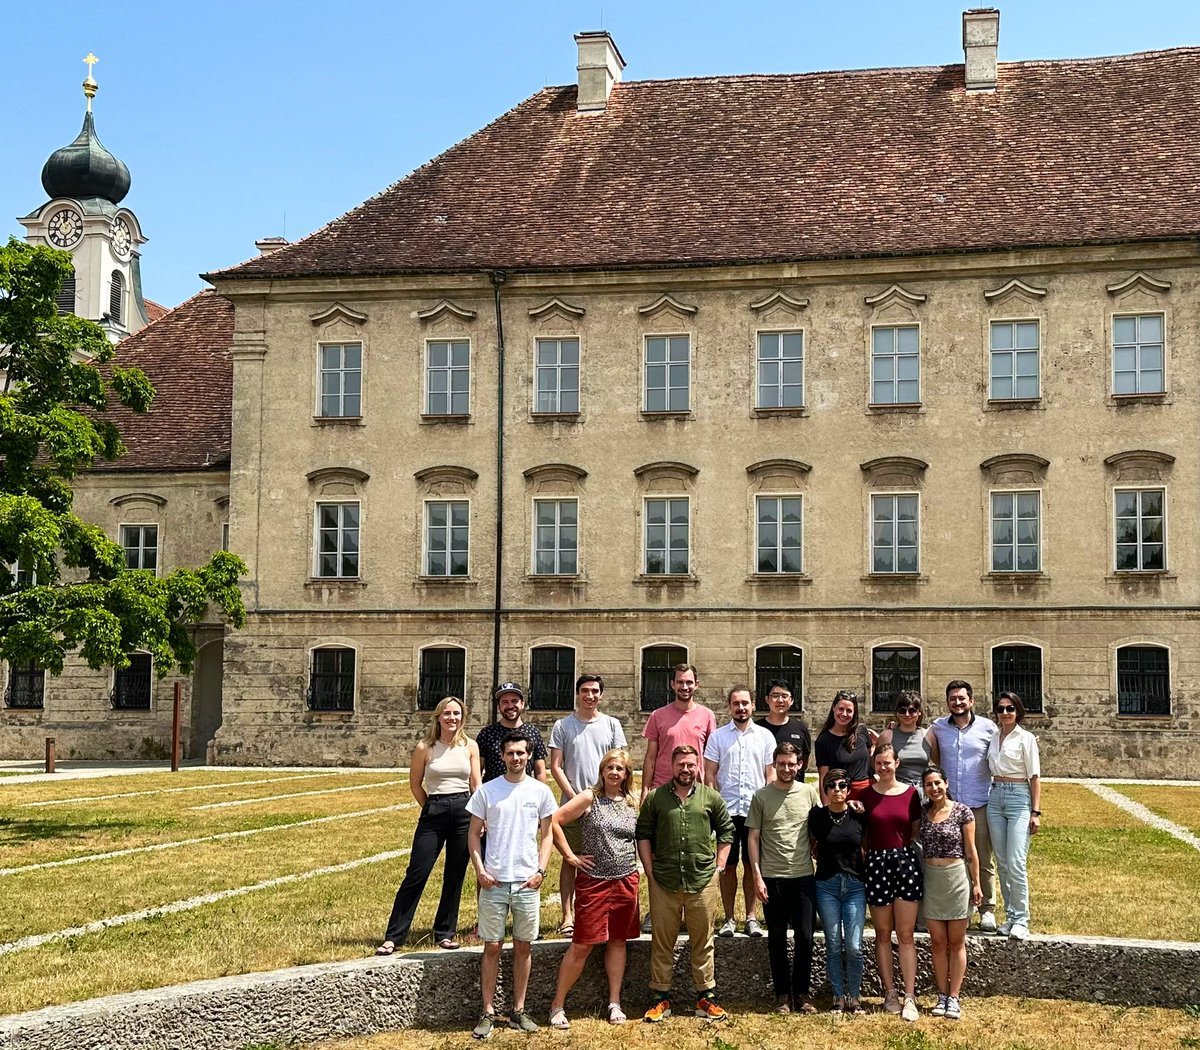 It’s a wrap. Over the last 3 days we were refining our research & teaching strategy focusing on #accessibilityplanning, #mobilityjustice, #mobilityconcepts & #governance. Many thanks to @TU_Muenchen & @ed_tum for this valuable opportunity to stay at Raitenhaslach monastery. #TUM